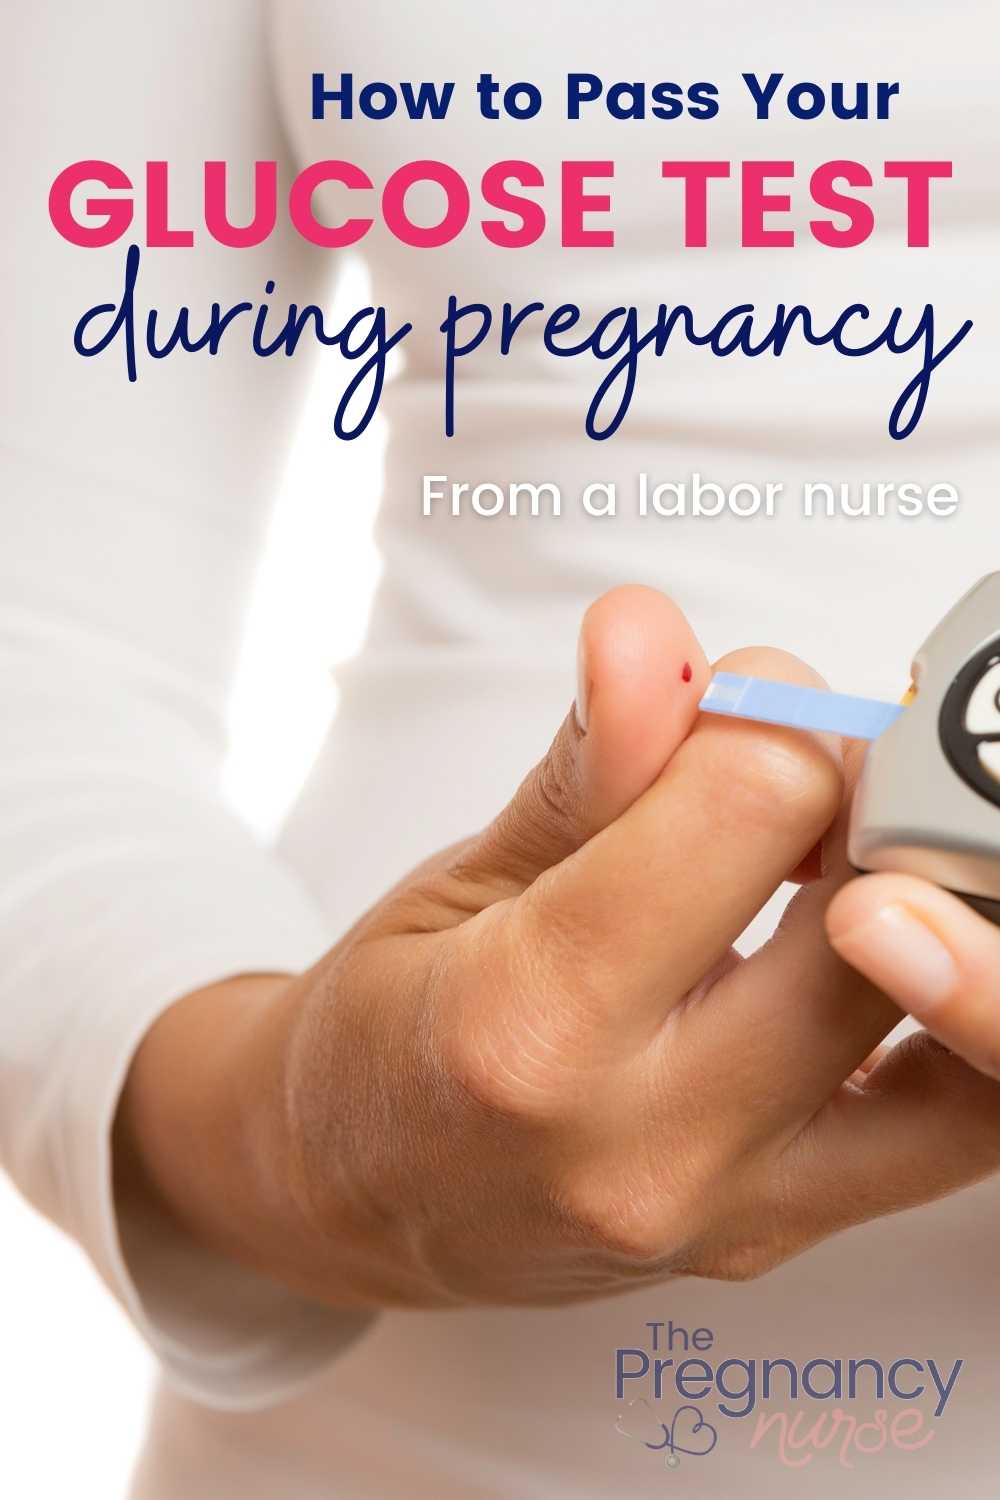 If you're pregnant and expecting to have a glucose test as part of your prenatal care, then this is the post for you! Here we'll go over everything you need to know about what to eat and drink before the test, and what to do on the day of the test. You're going to breeze through it with these tips!